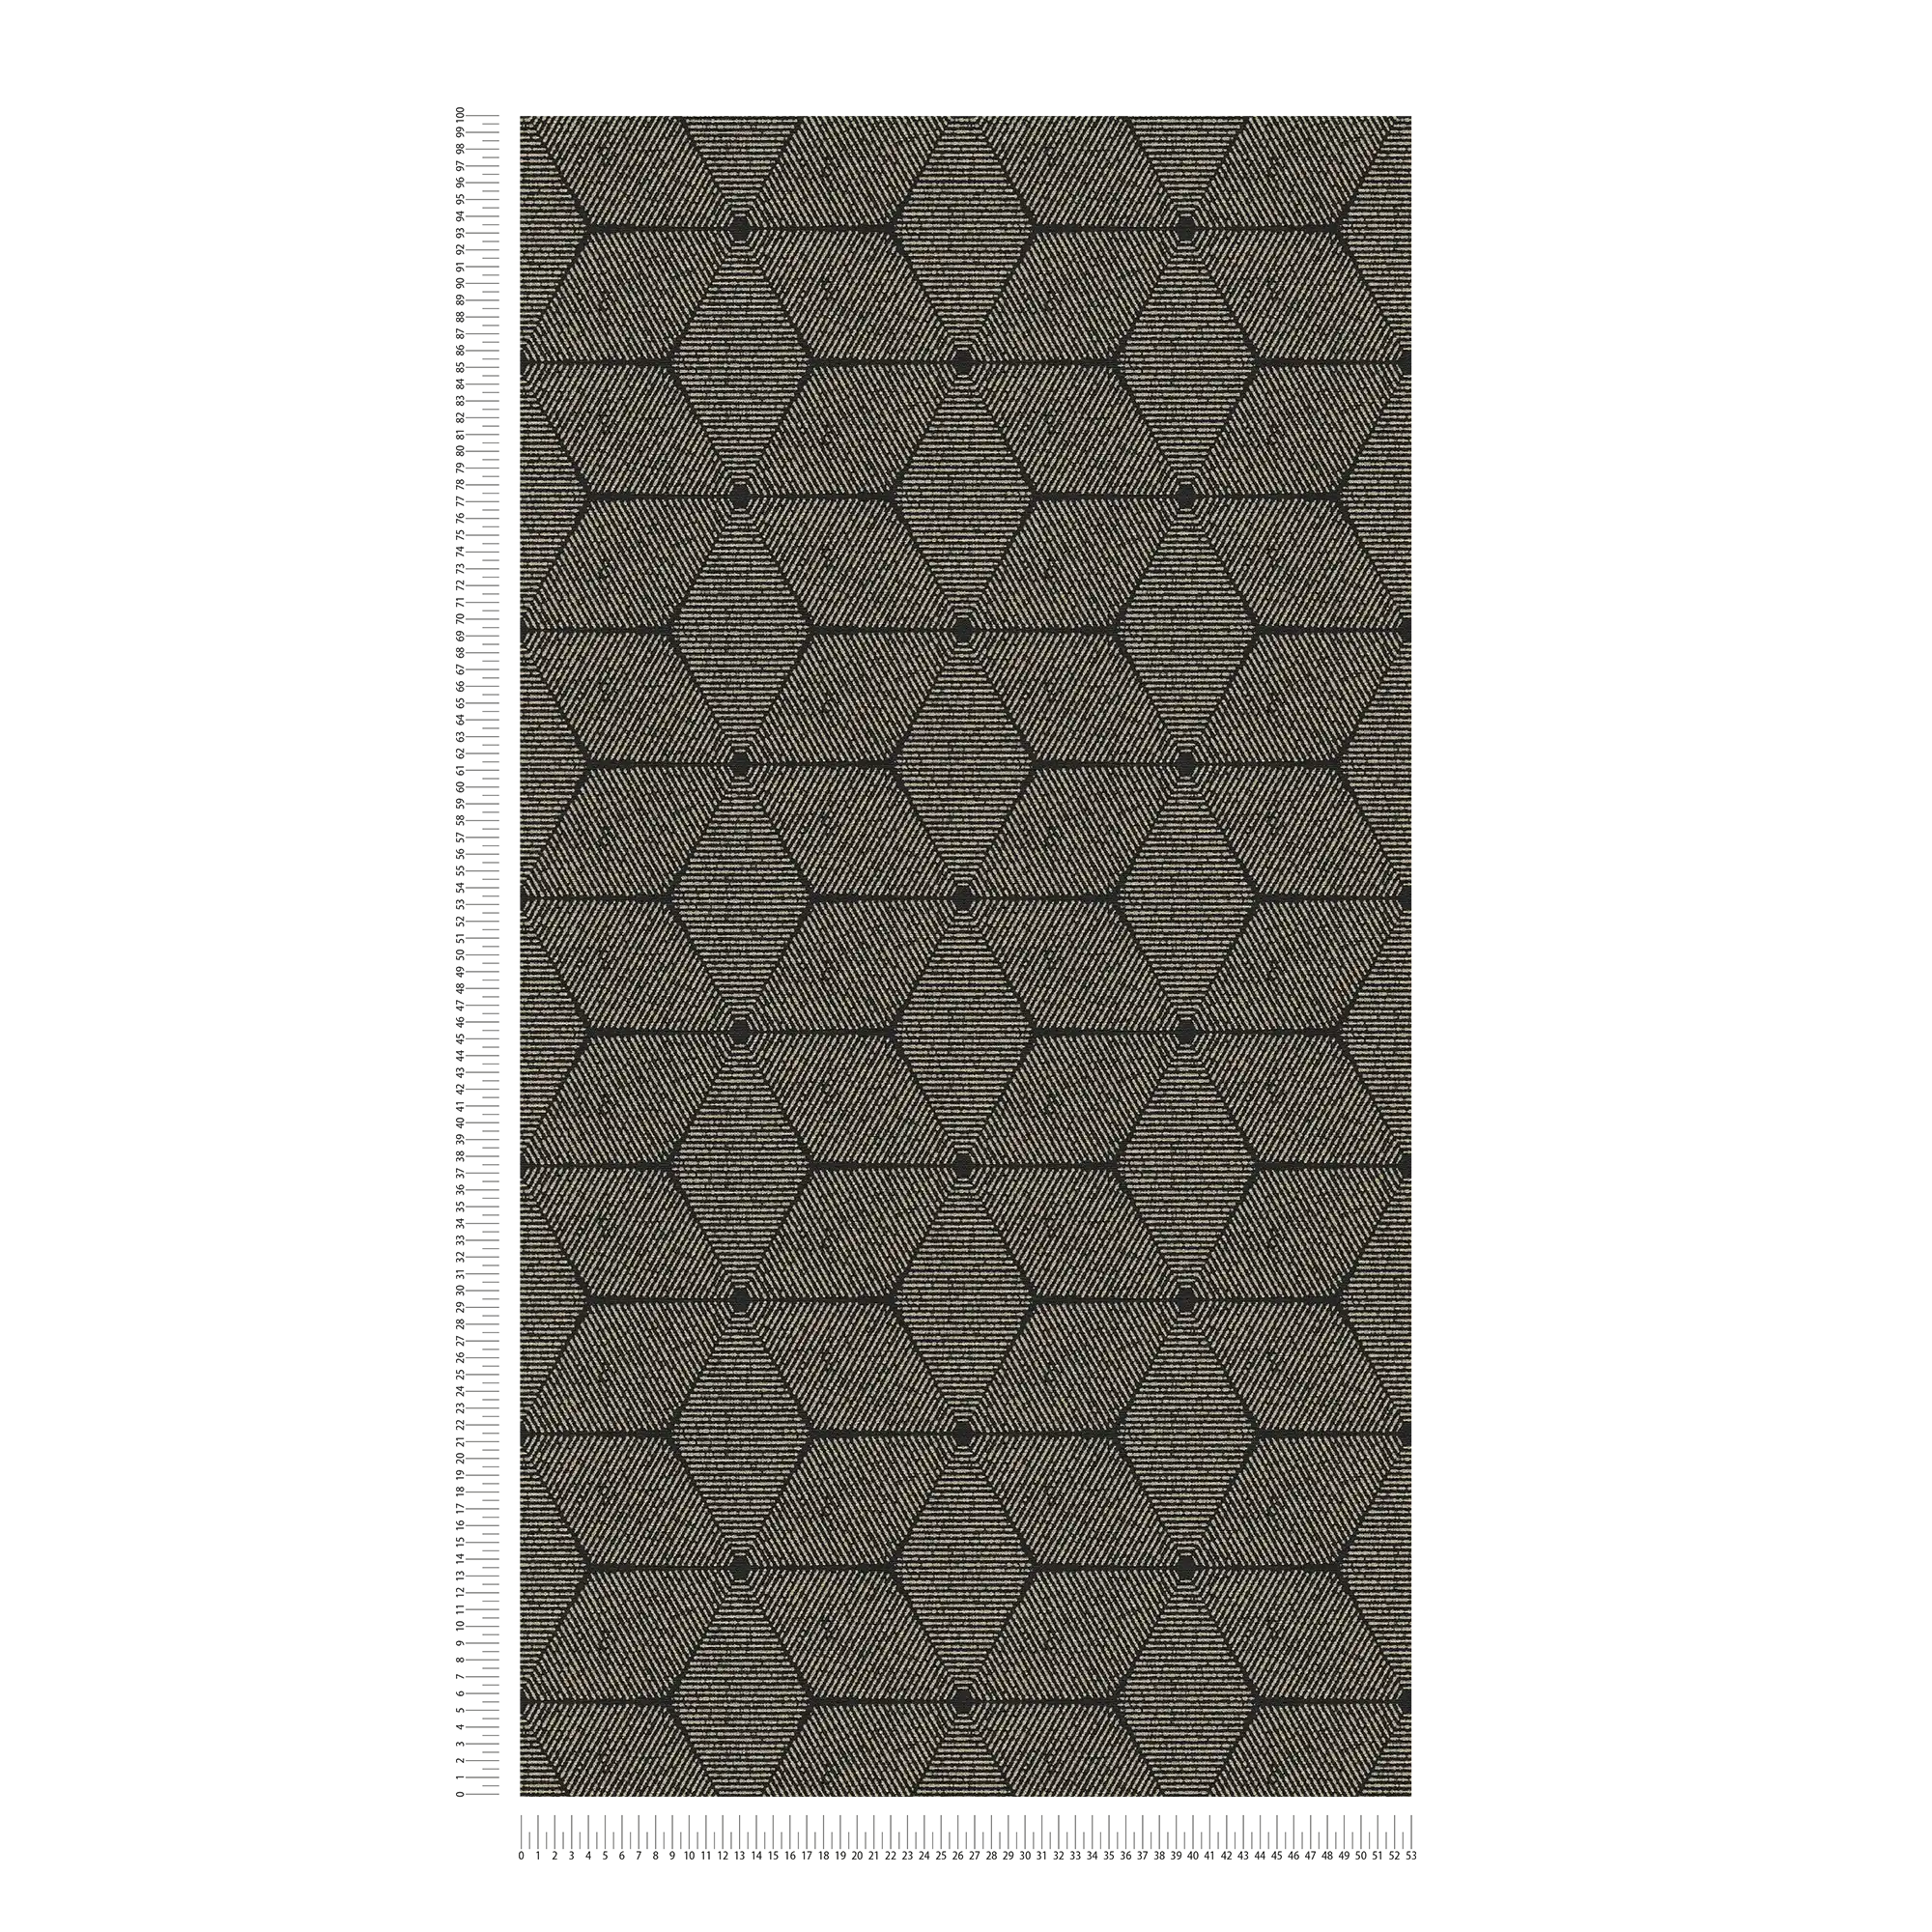             Non-woven wallpaper in a slightly shiny pattern - black, gold
        